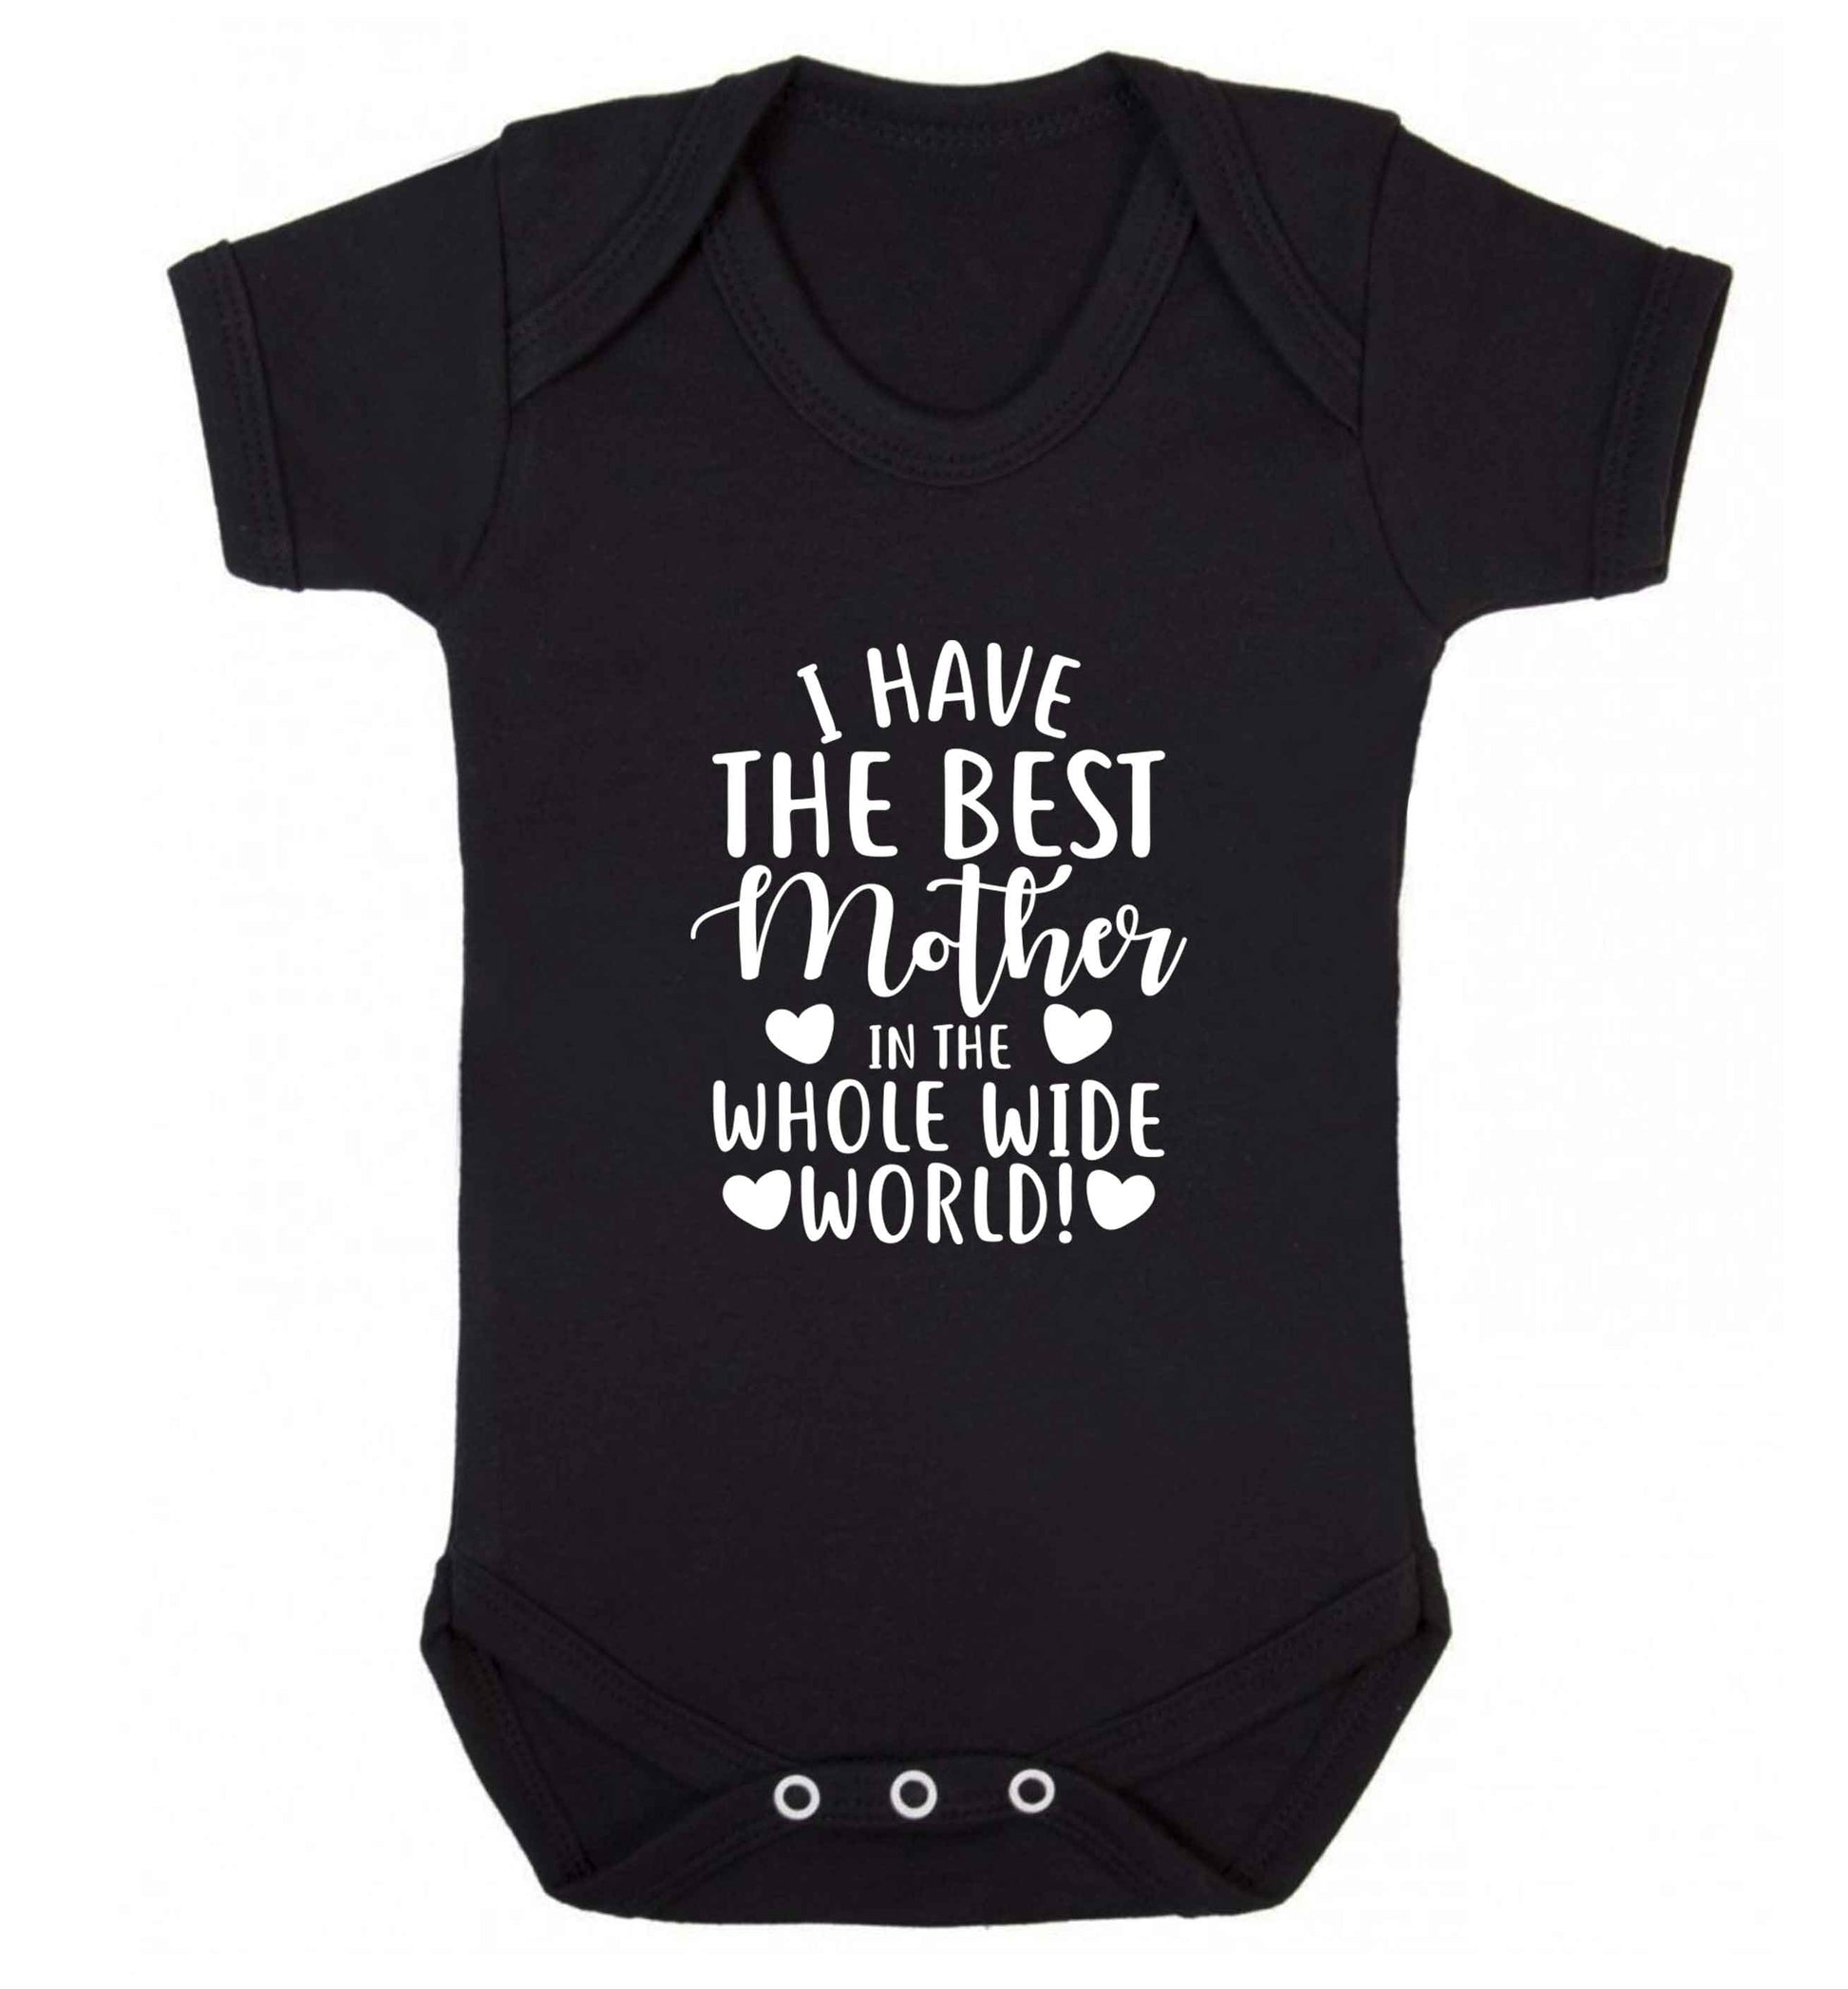 I have the best mother in the whole wide world baby vest black 18-24 months